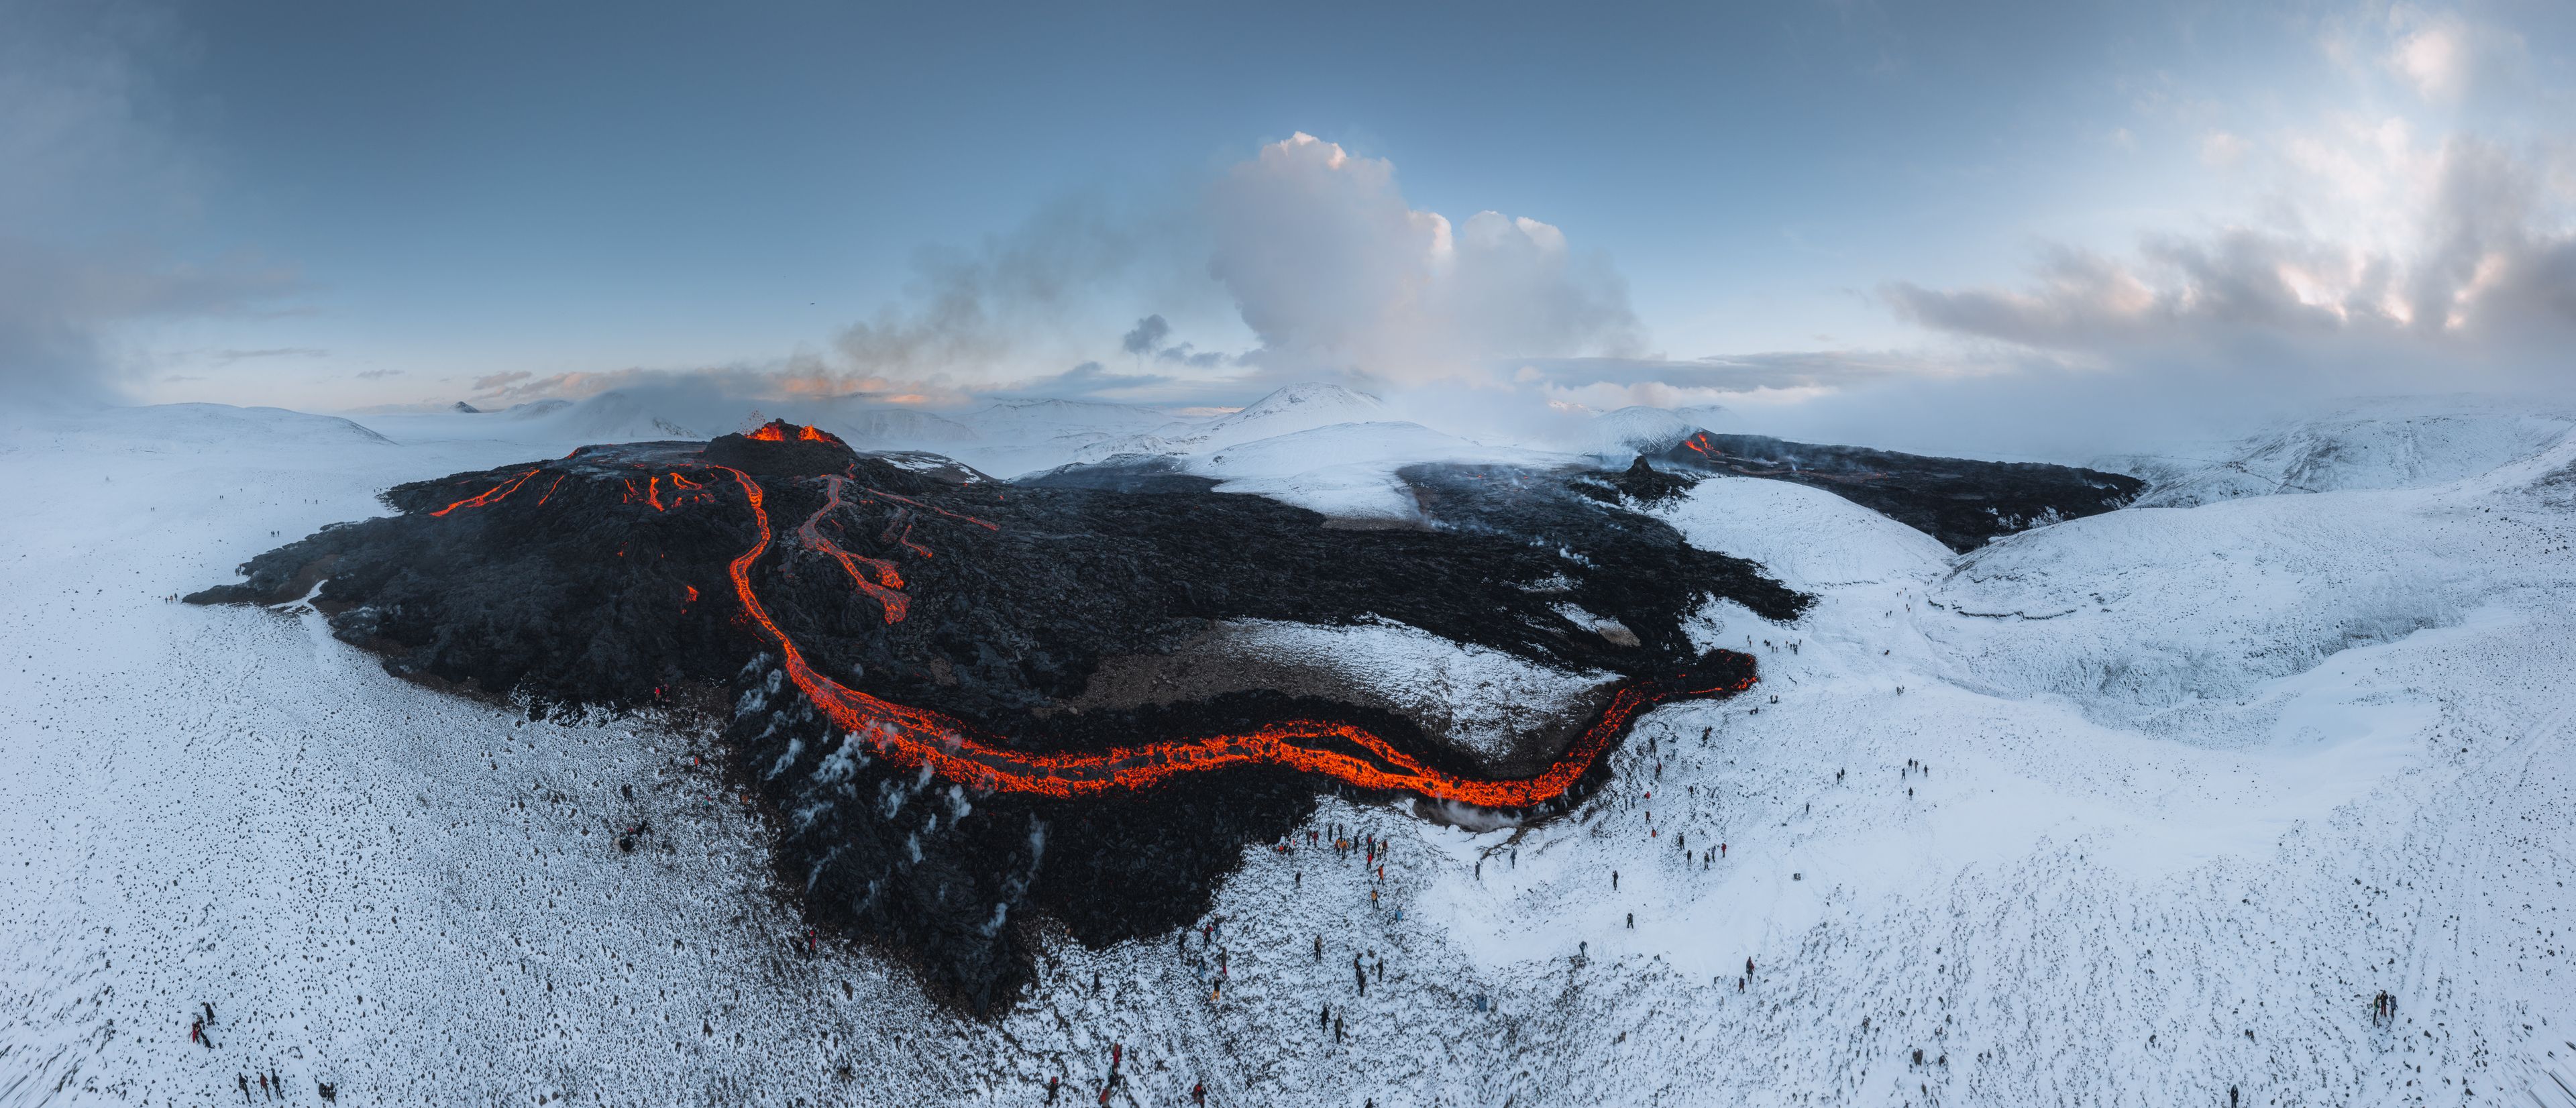 A view of lava flows from the Fagradalsfjall eruption